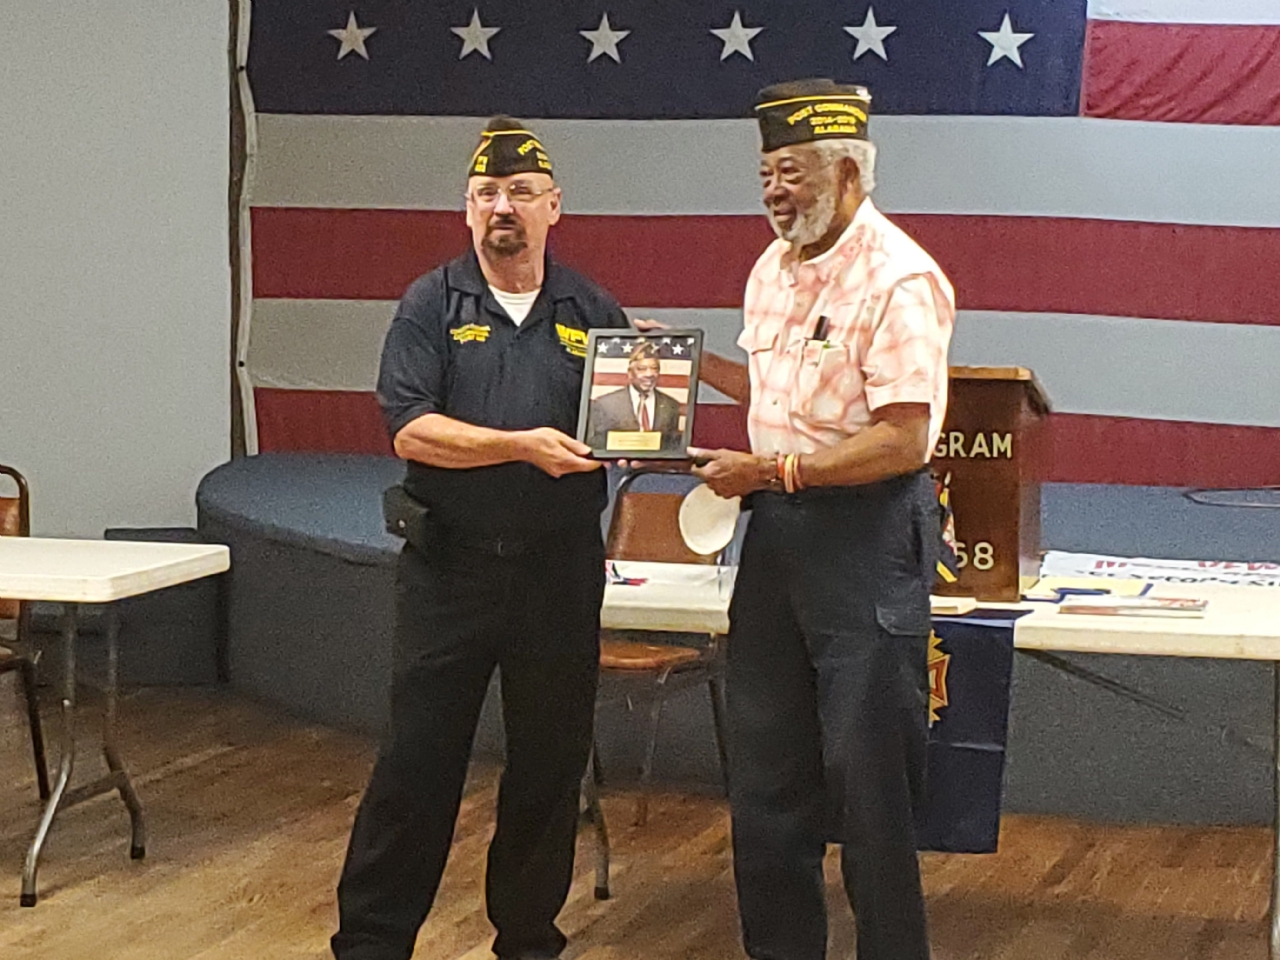 VFW Post 668 celebrates its first African American Post Commander, Henry Brown, Jr.  Past Commander Brown is a veteran of the Vietnam War.